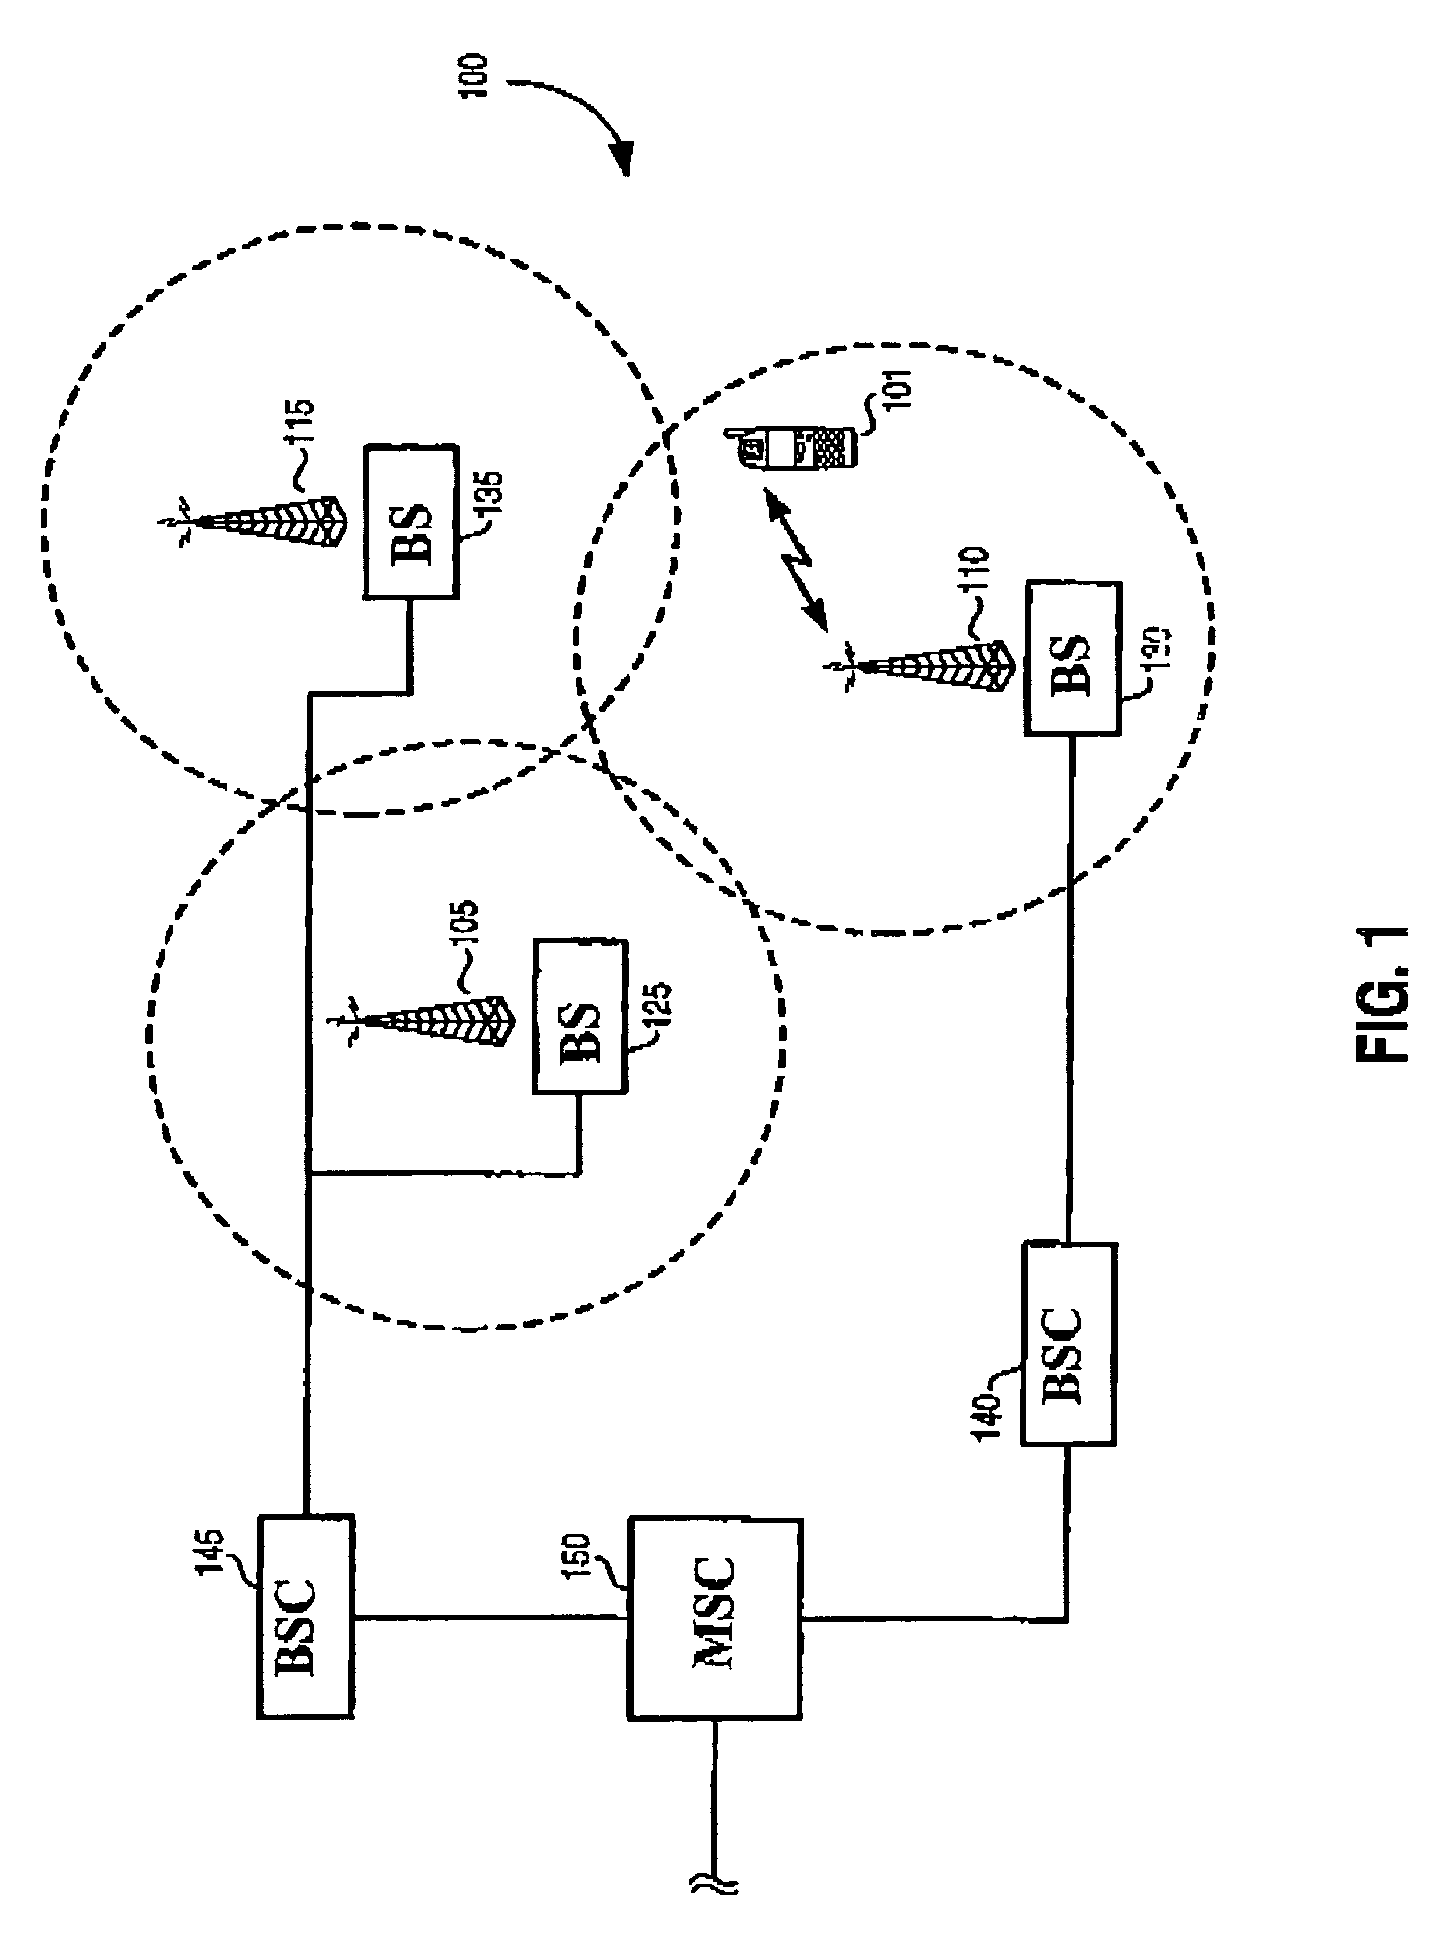 Method and system for RLP optimization